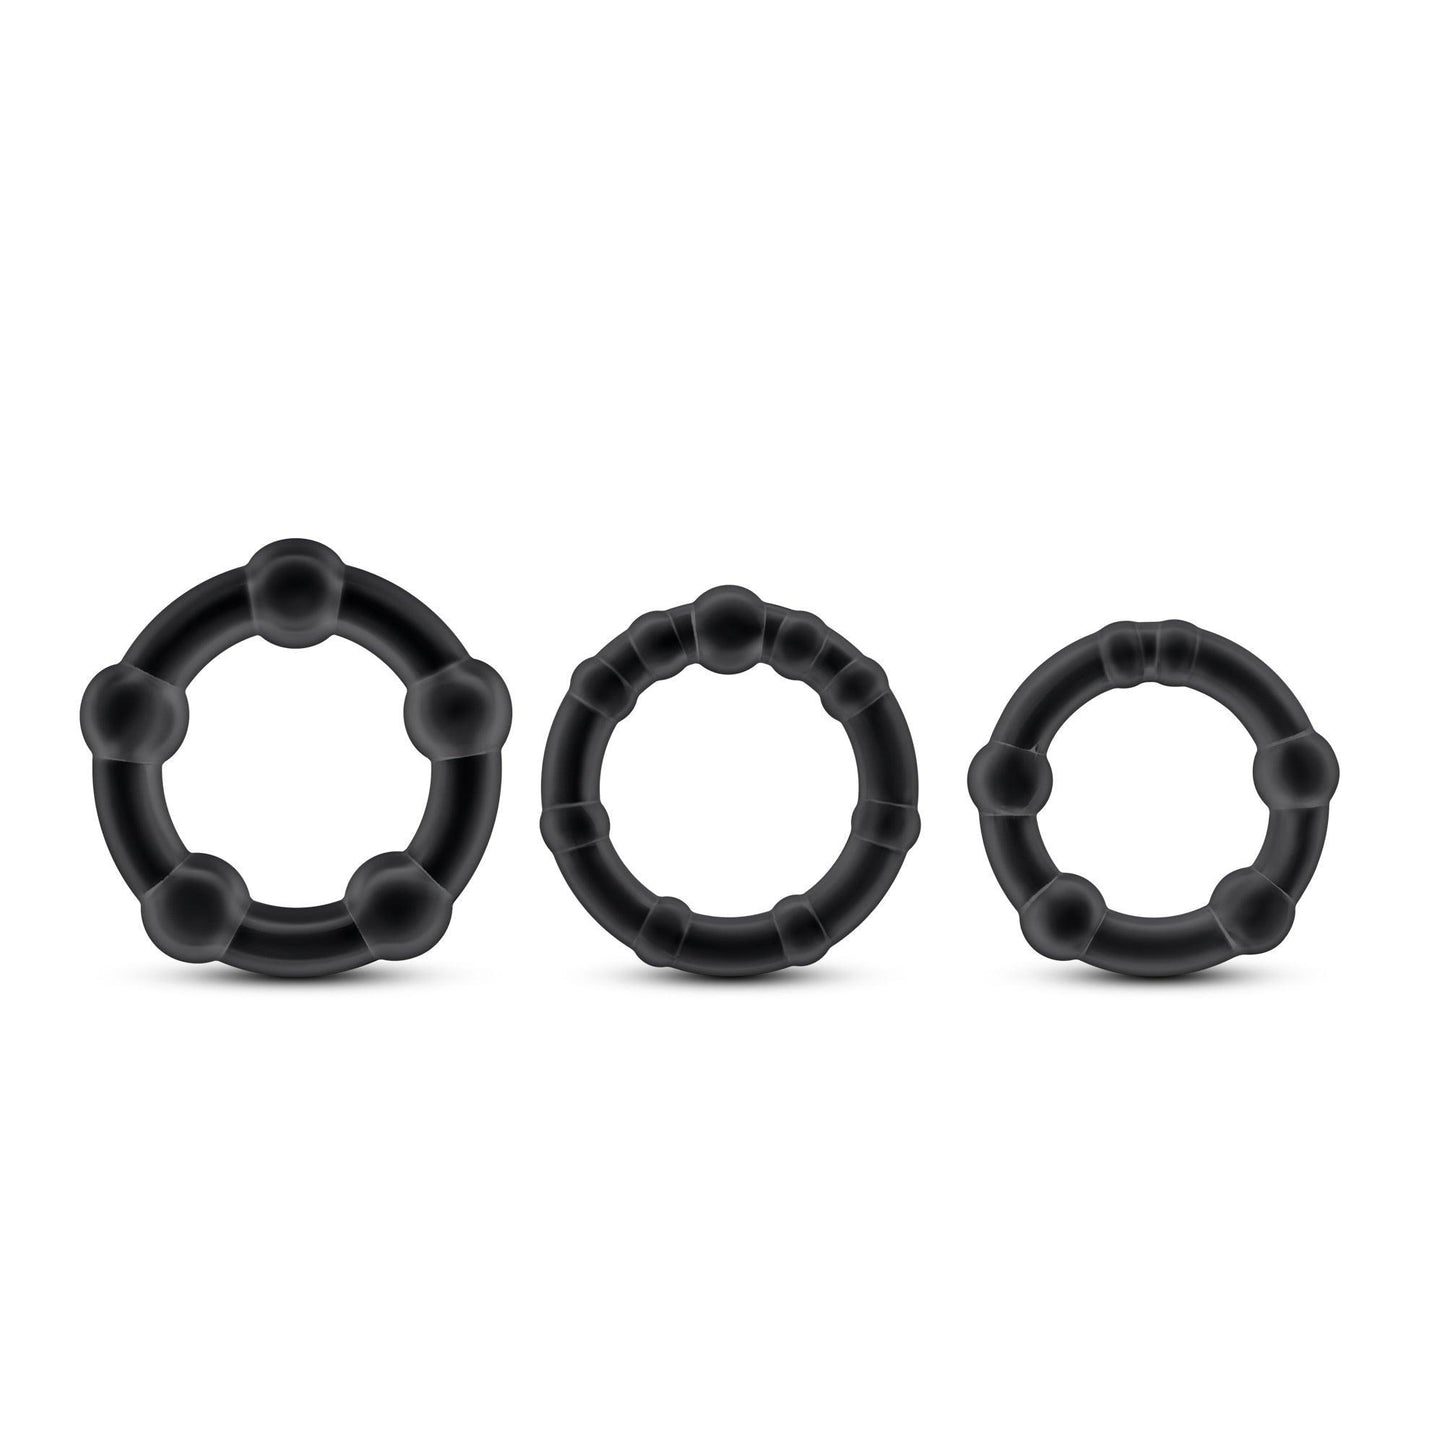 Stay Hard - Beaded Cock Rings - 3 Pack - Black - My Sex Toy Hub